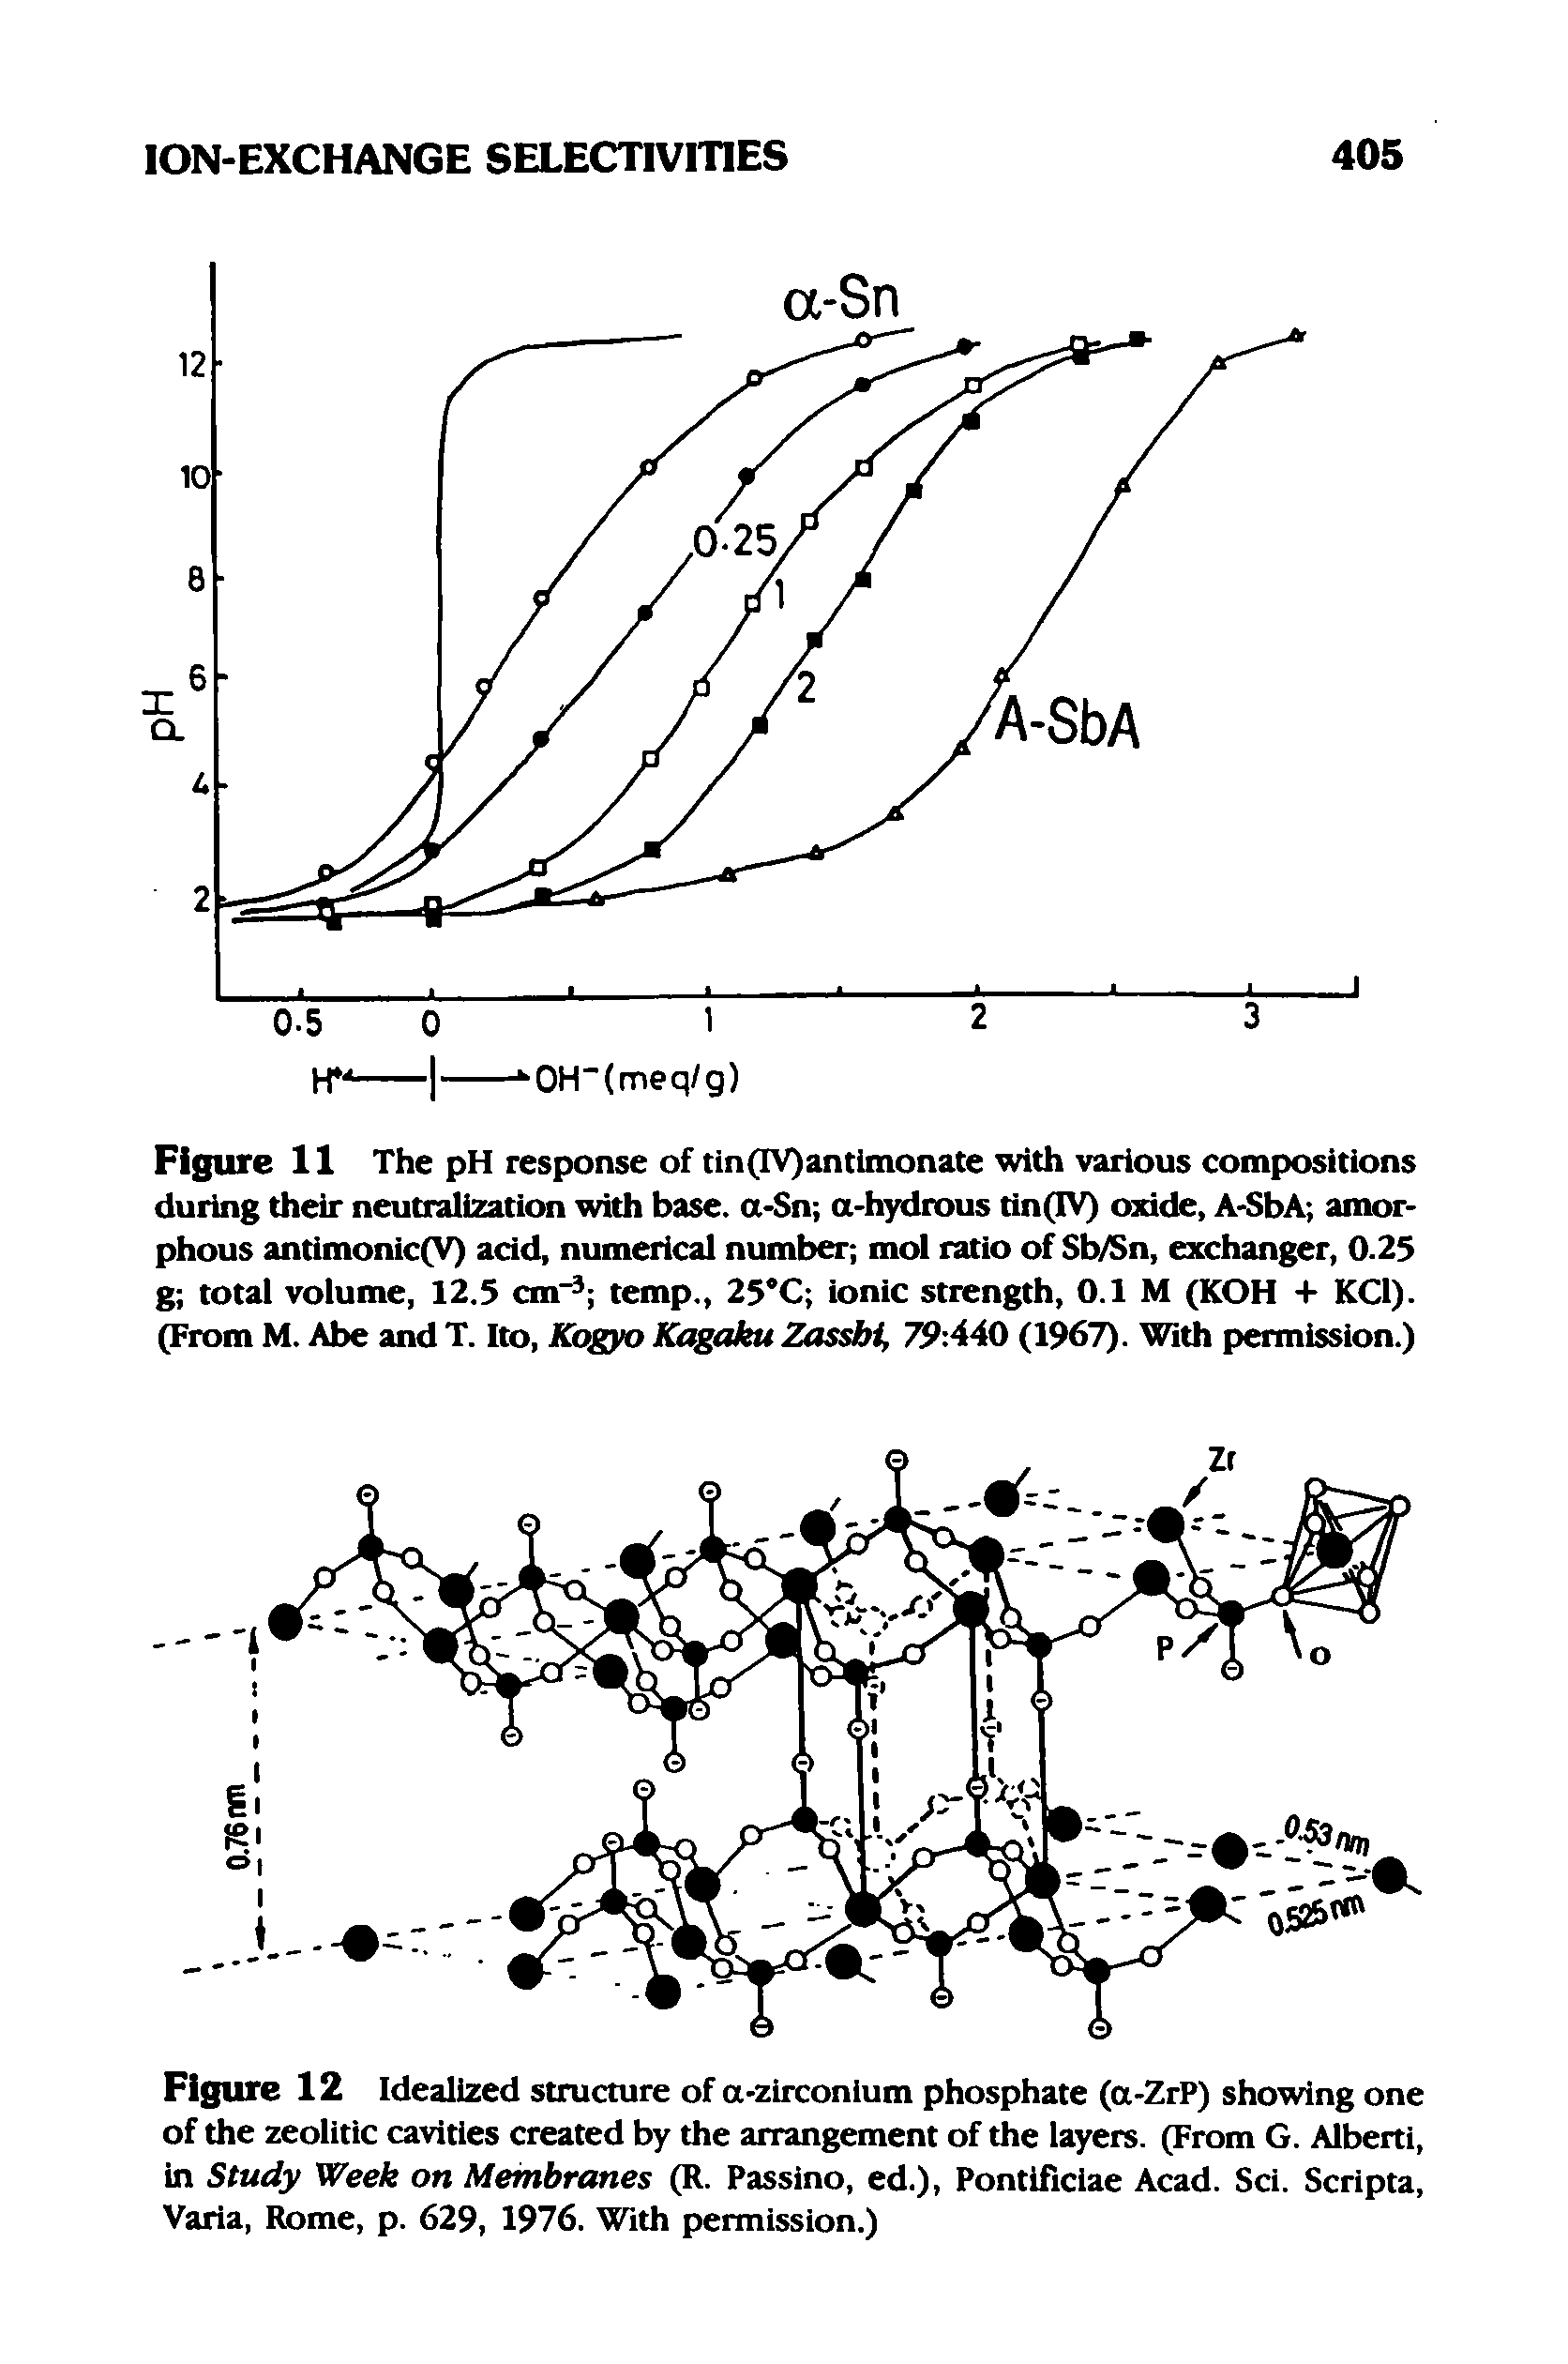 Figure 11 The pH response of tin(IV)antimonate with various compositions during their neutralization with base. a-Sn a-hydrous tin(IV) oxide, A-SbA amorphous antimonic(V) acid, numerical number mol ratio of Sb/Sn, exchanger, 0.25 g total volume, 12.5 cm" temp., 25 C ionic strength, 0.1 M (KOH + KCl). (From M. Abe and T. Ito, Abgyo Kagaku Zassbi, 79 A40 (1967). With permission.)...